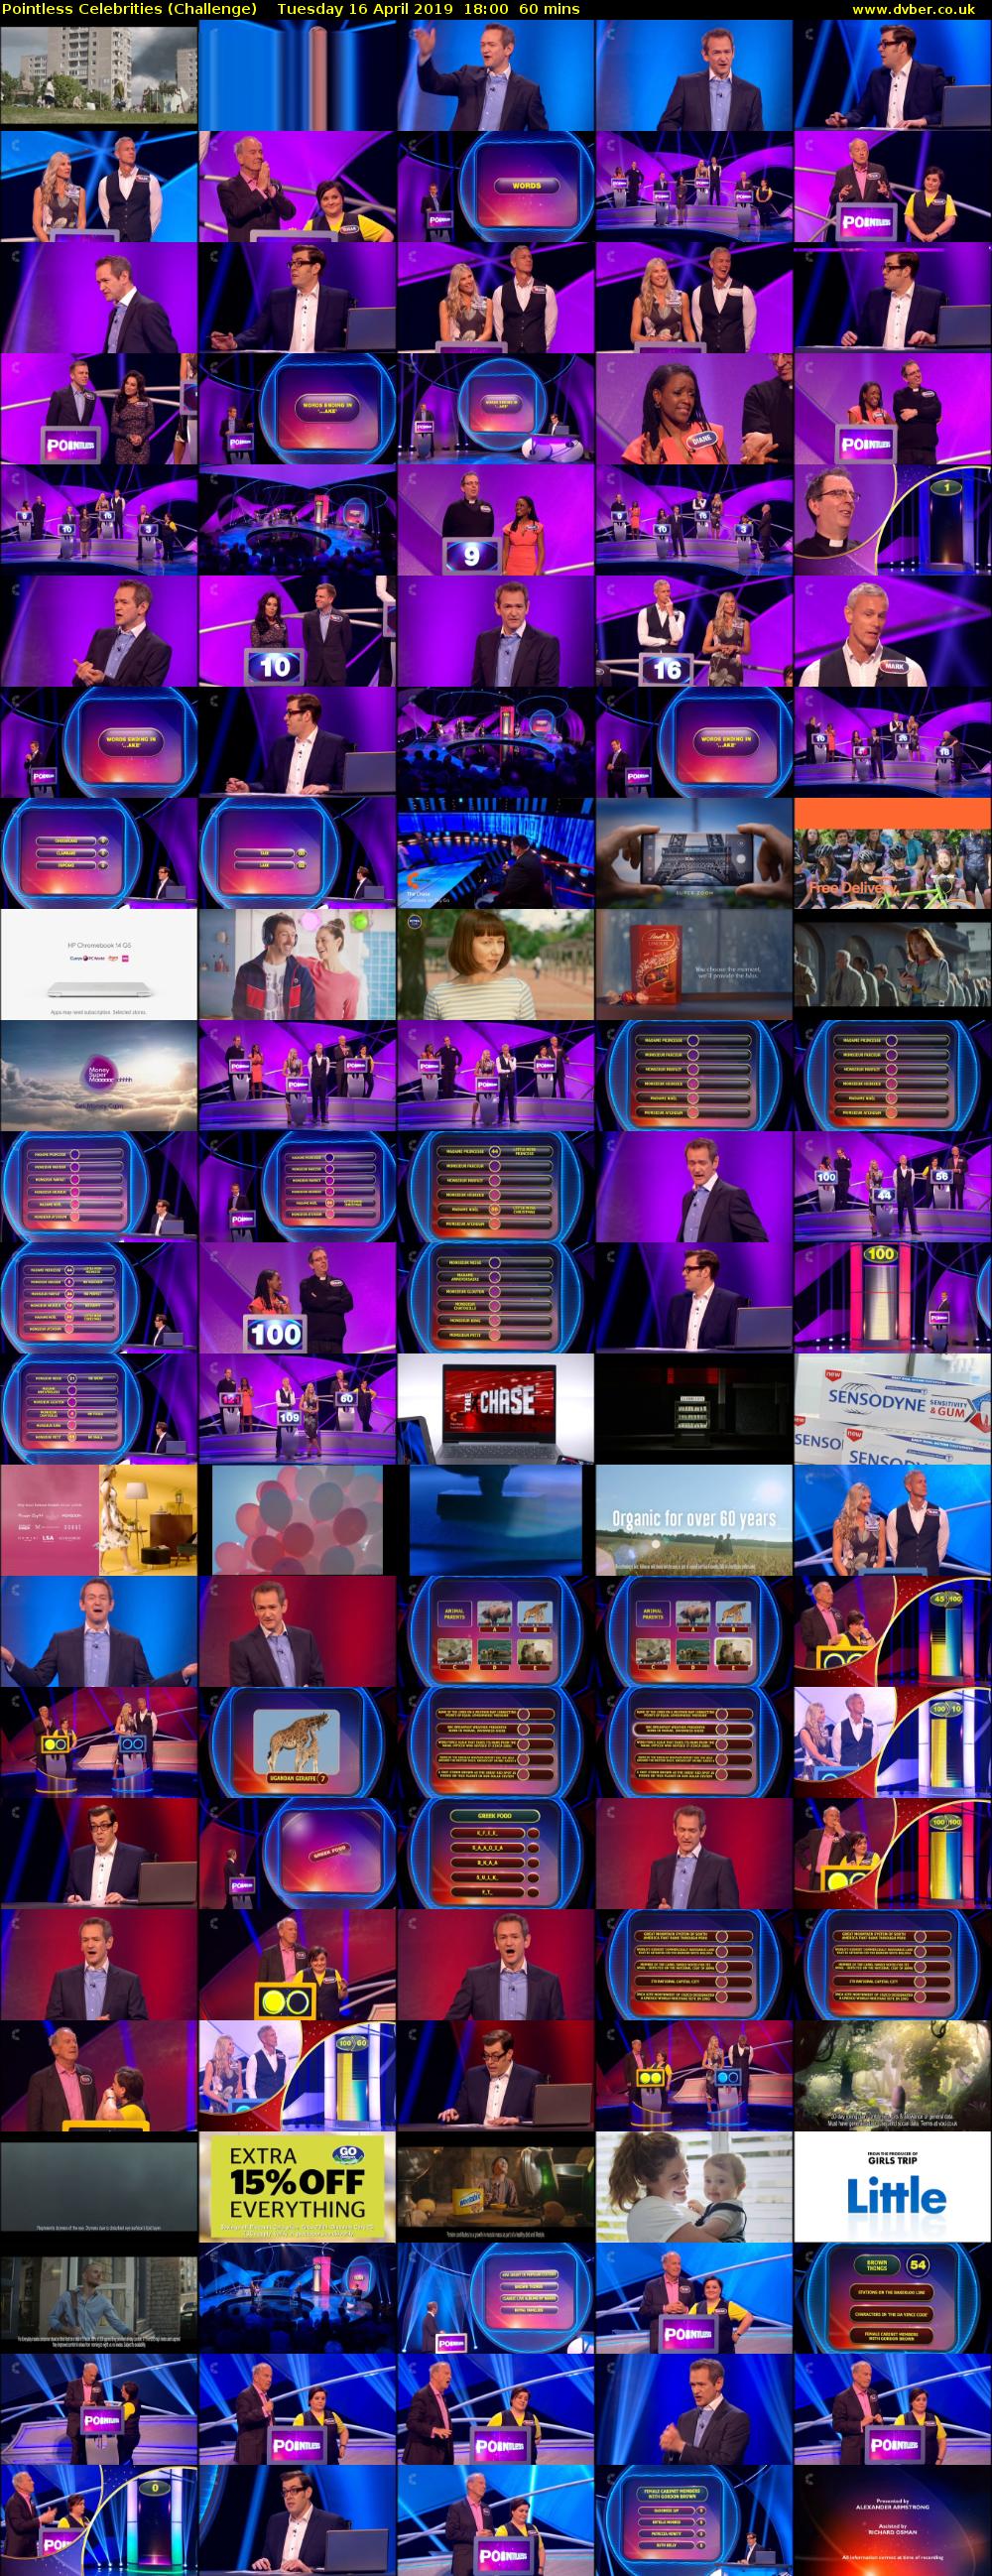 Pointless Celebrities (Challenge) Tuesday 16 April 2019 18:00 - 19:00